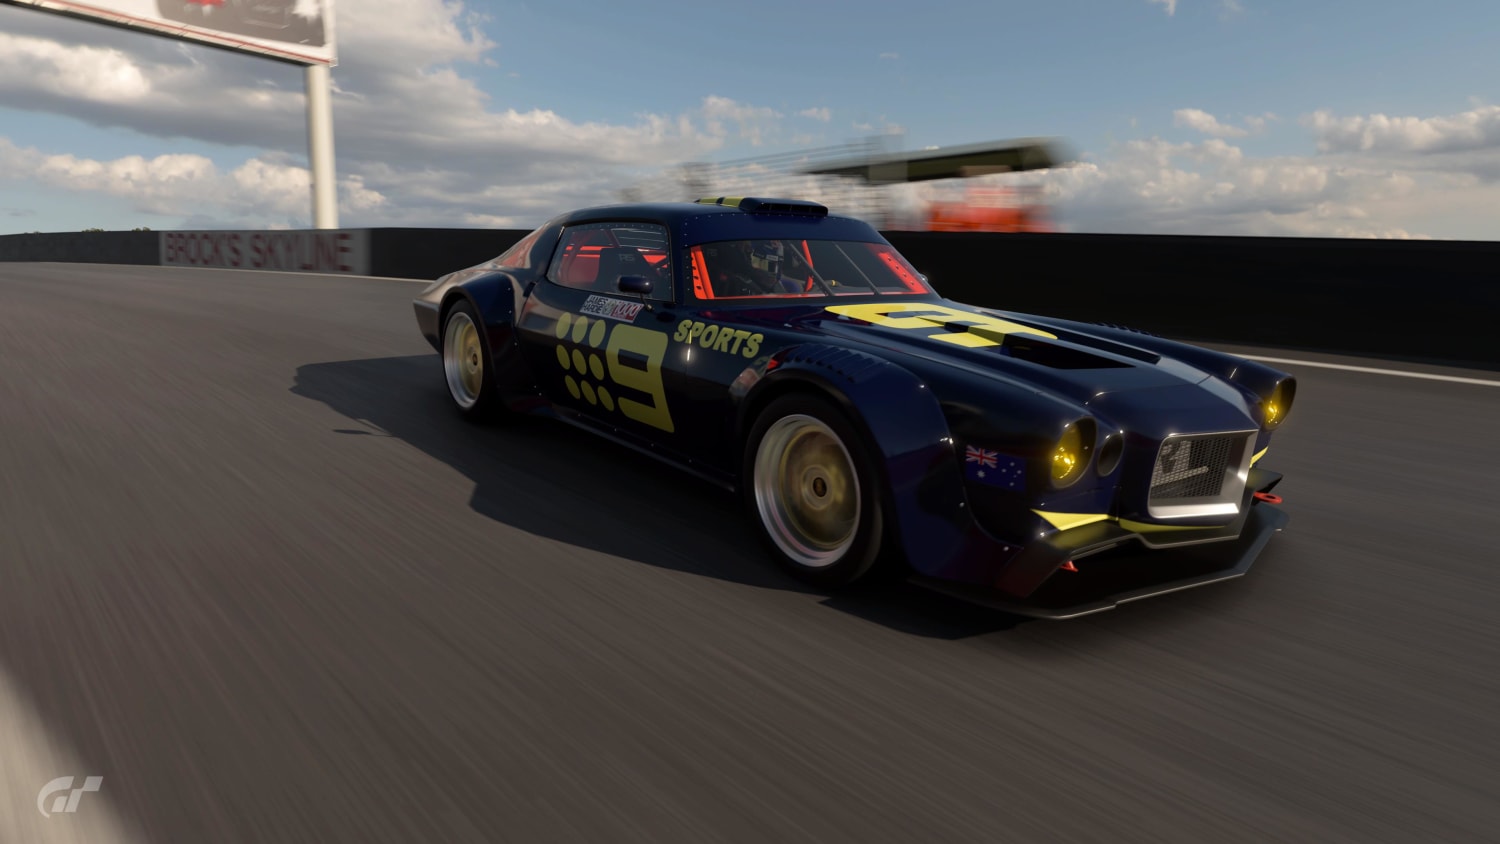 Had a try at recreating a Bathurst car...Kevin Bartlett's Channel Nine Camaro!